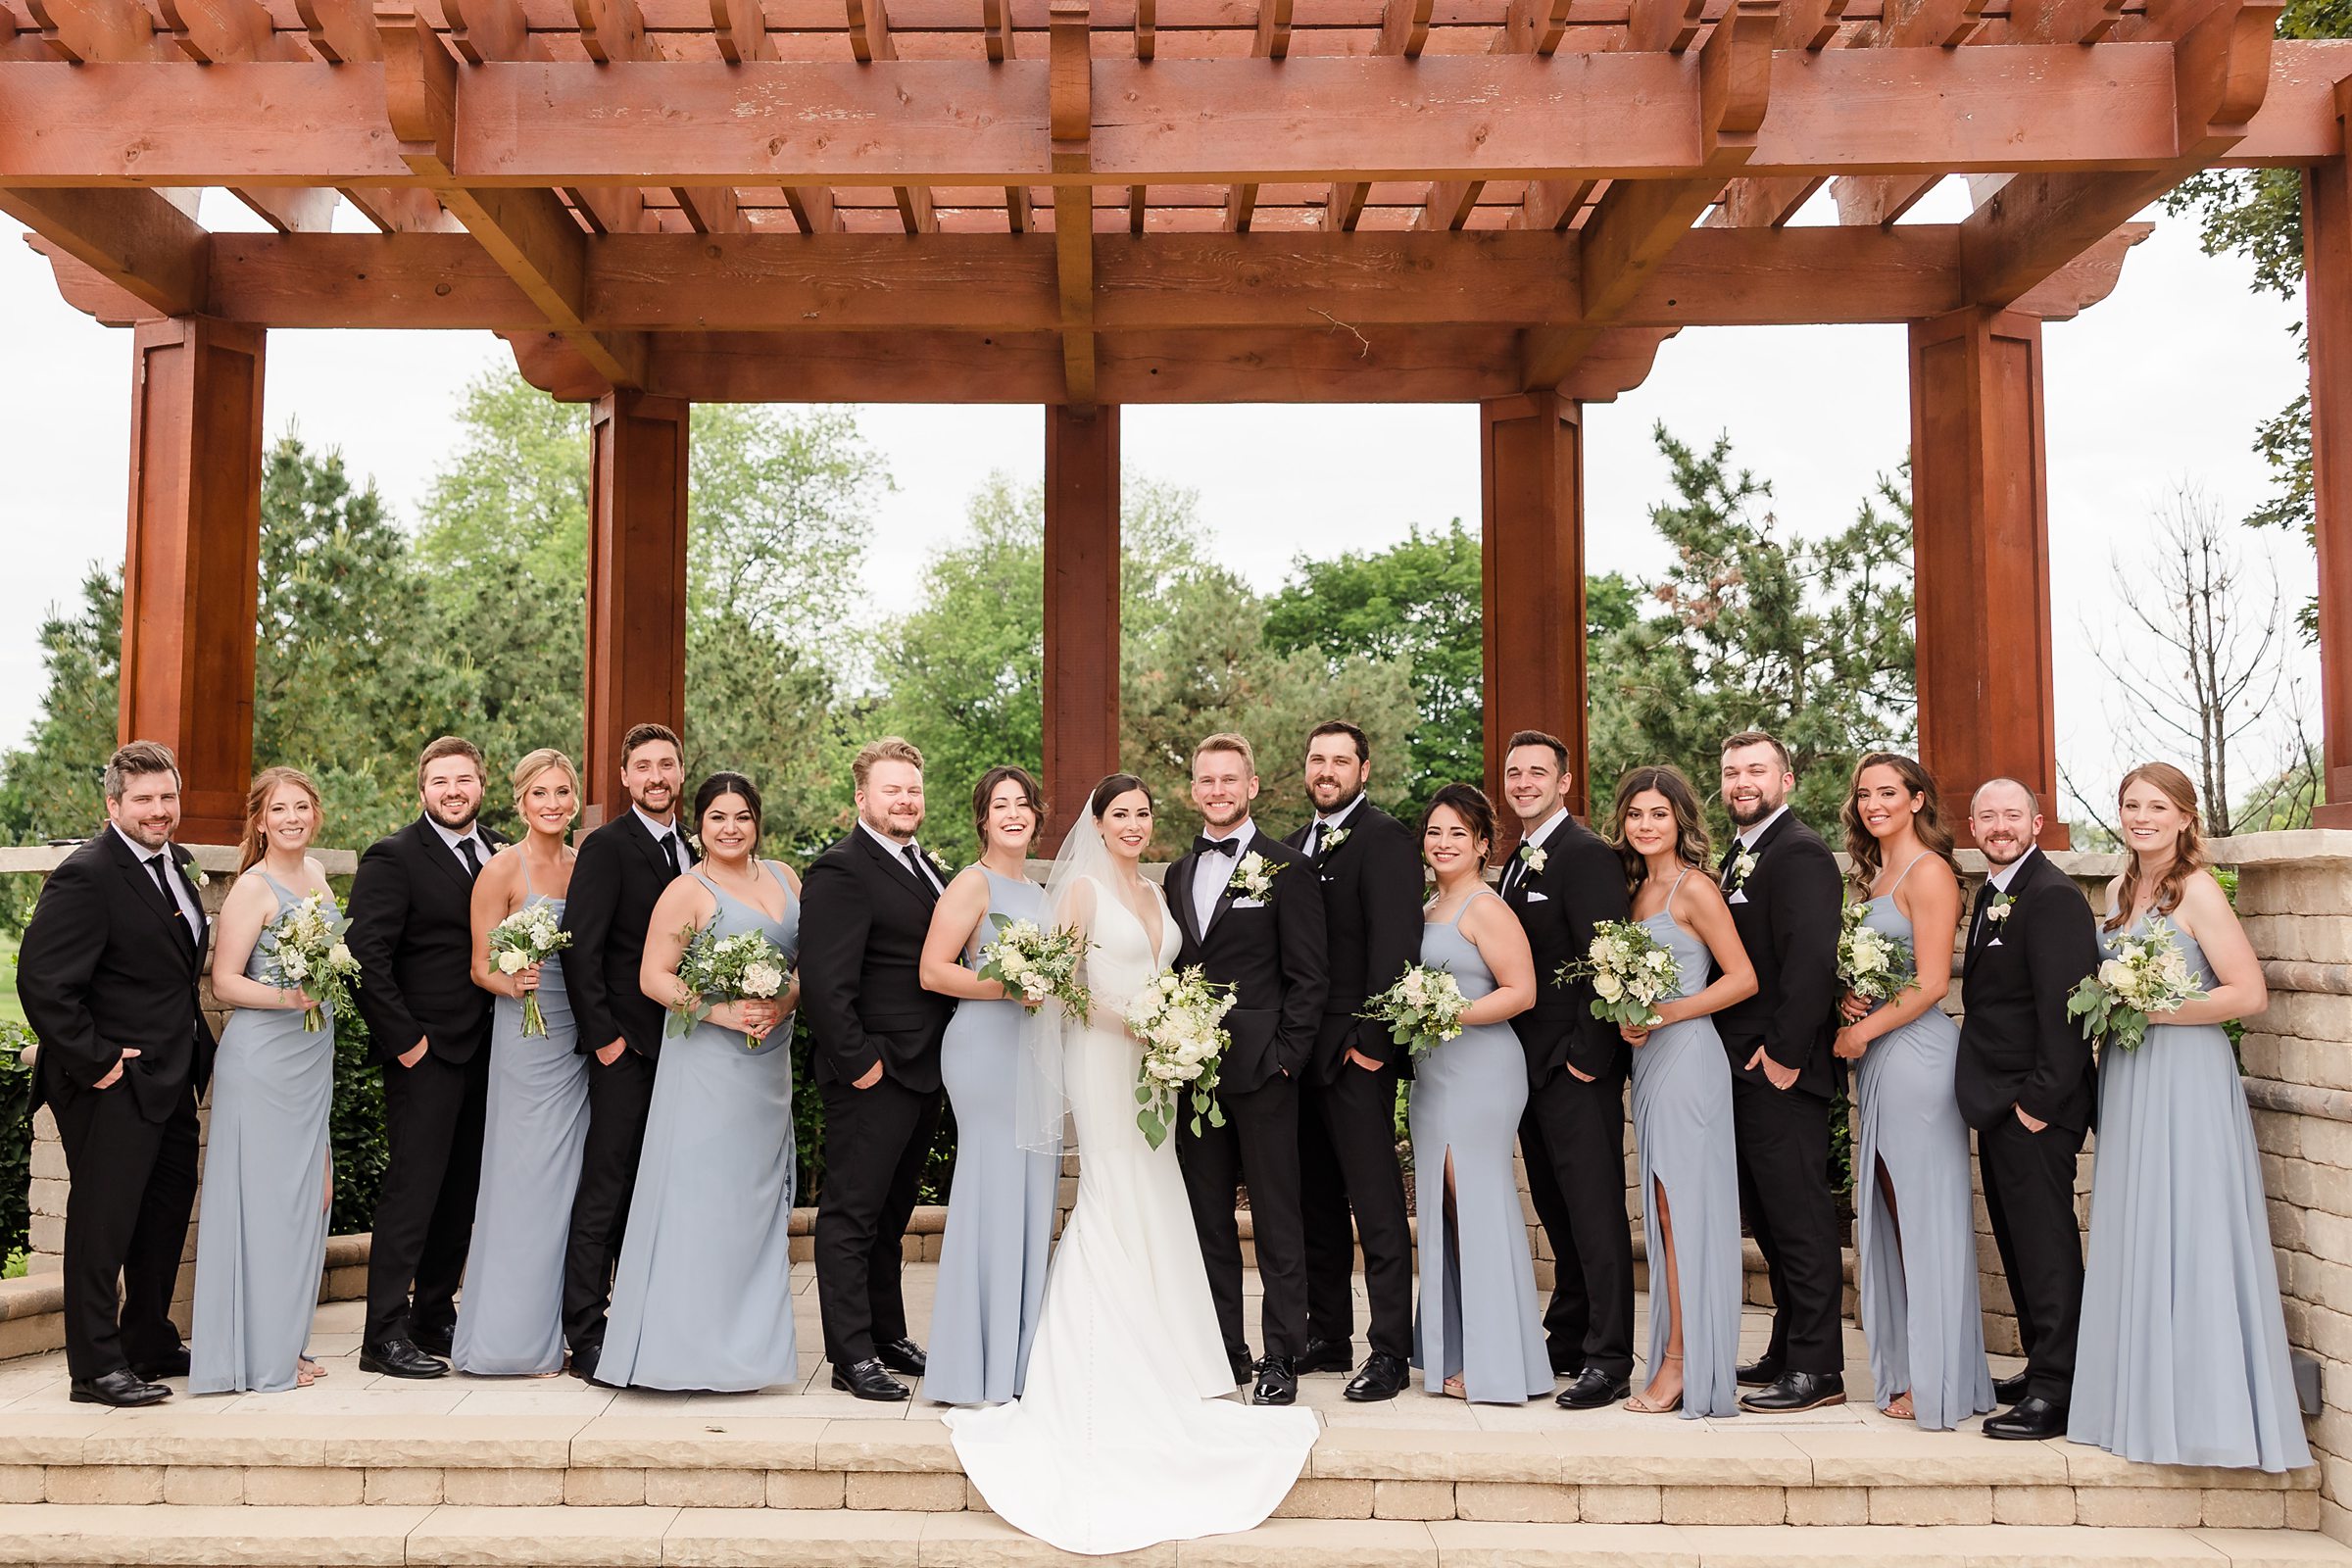 Full Bridal party during a wedding at the Chevy Chase Country Club in Wheeling, Illinois.